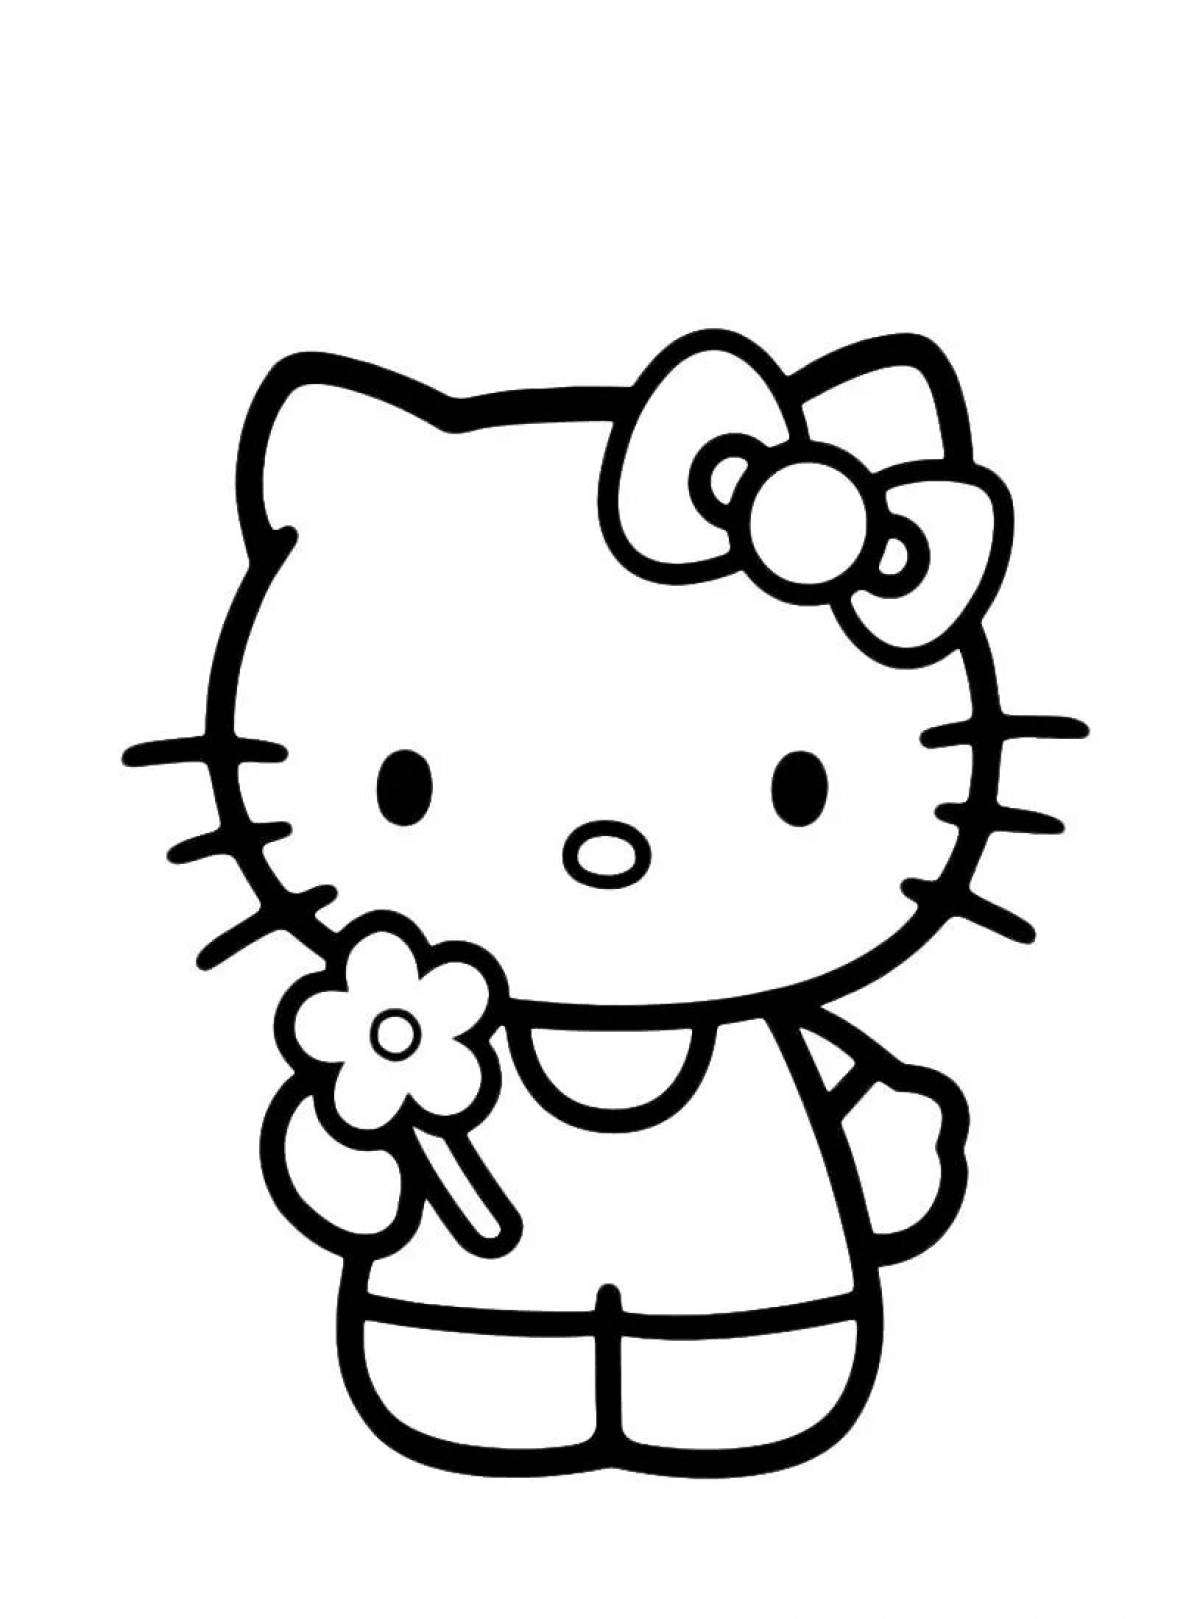 Cute hello kitty and her friends coloring pages